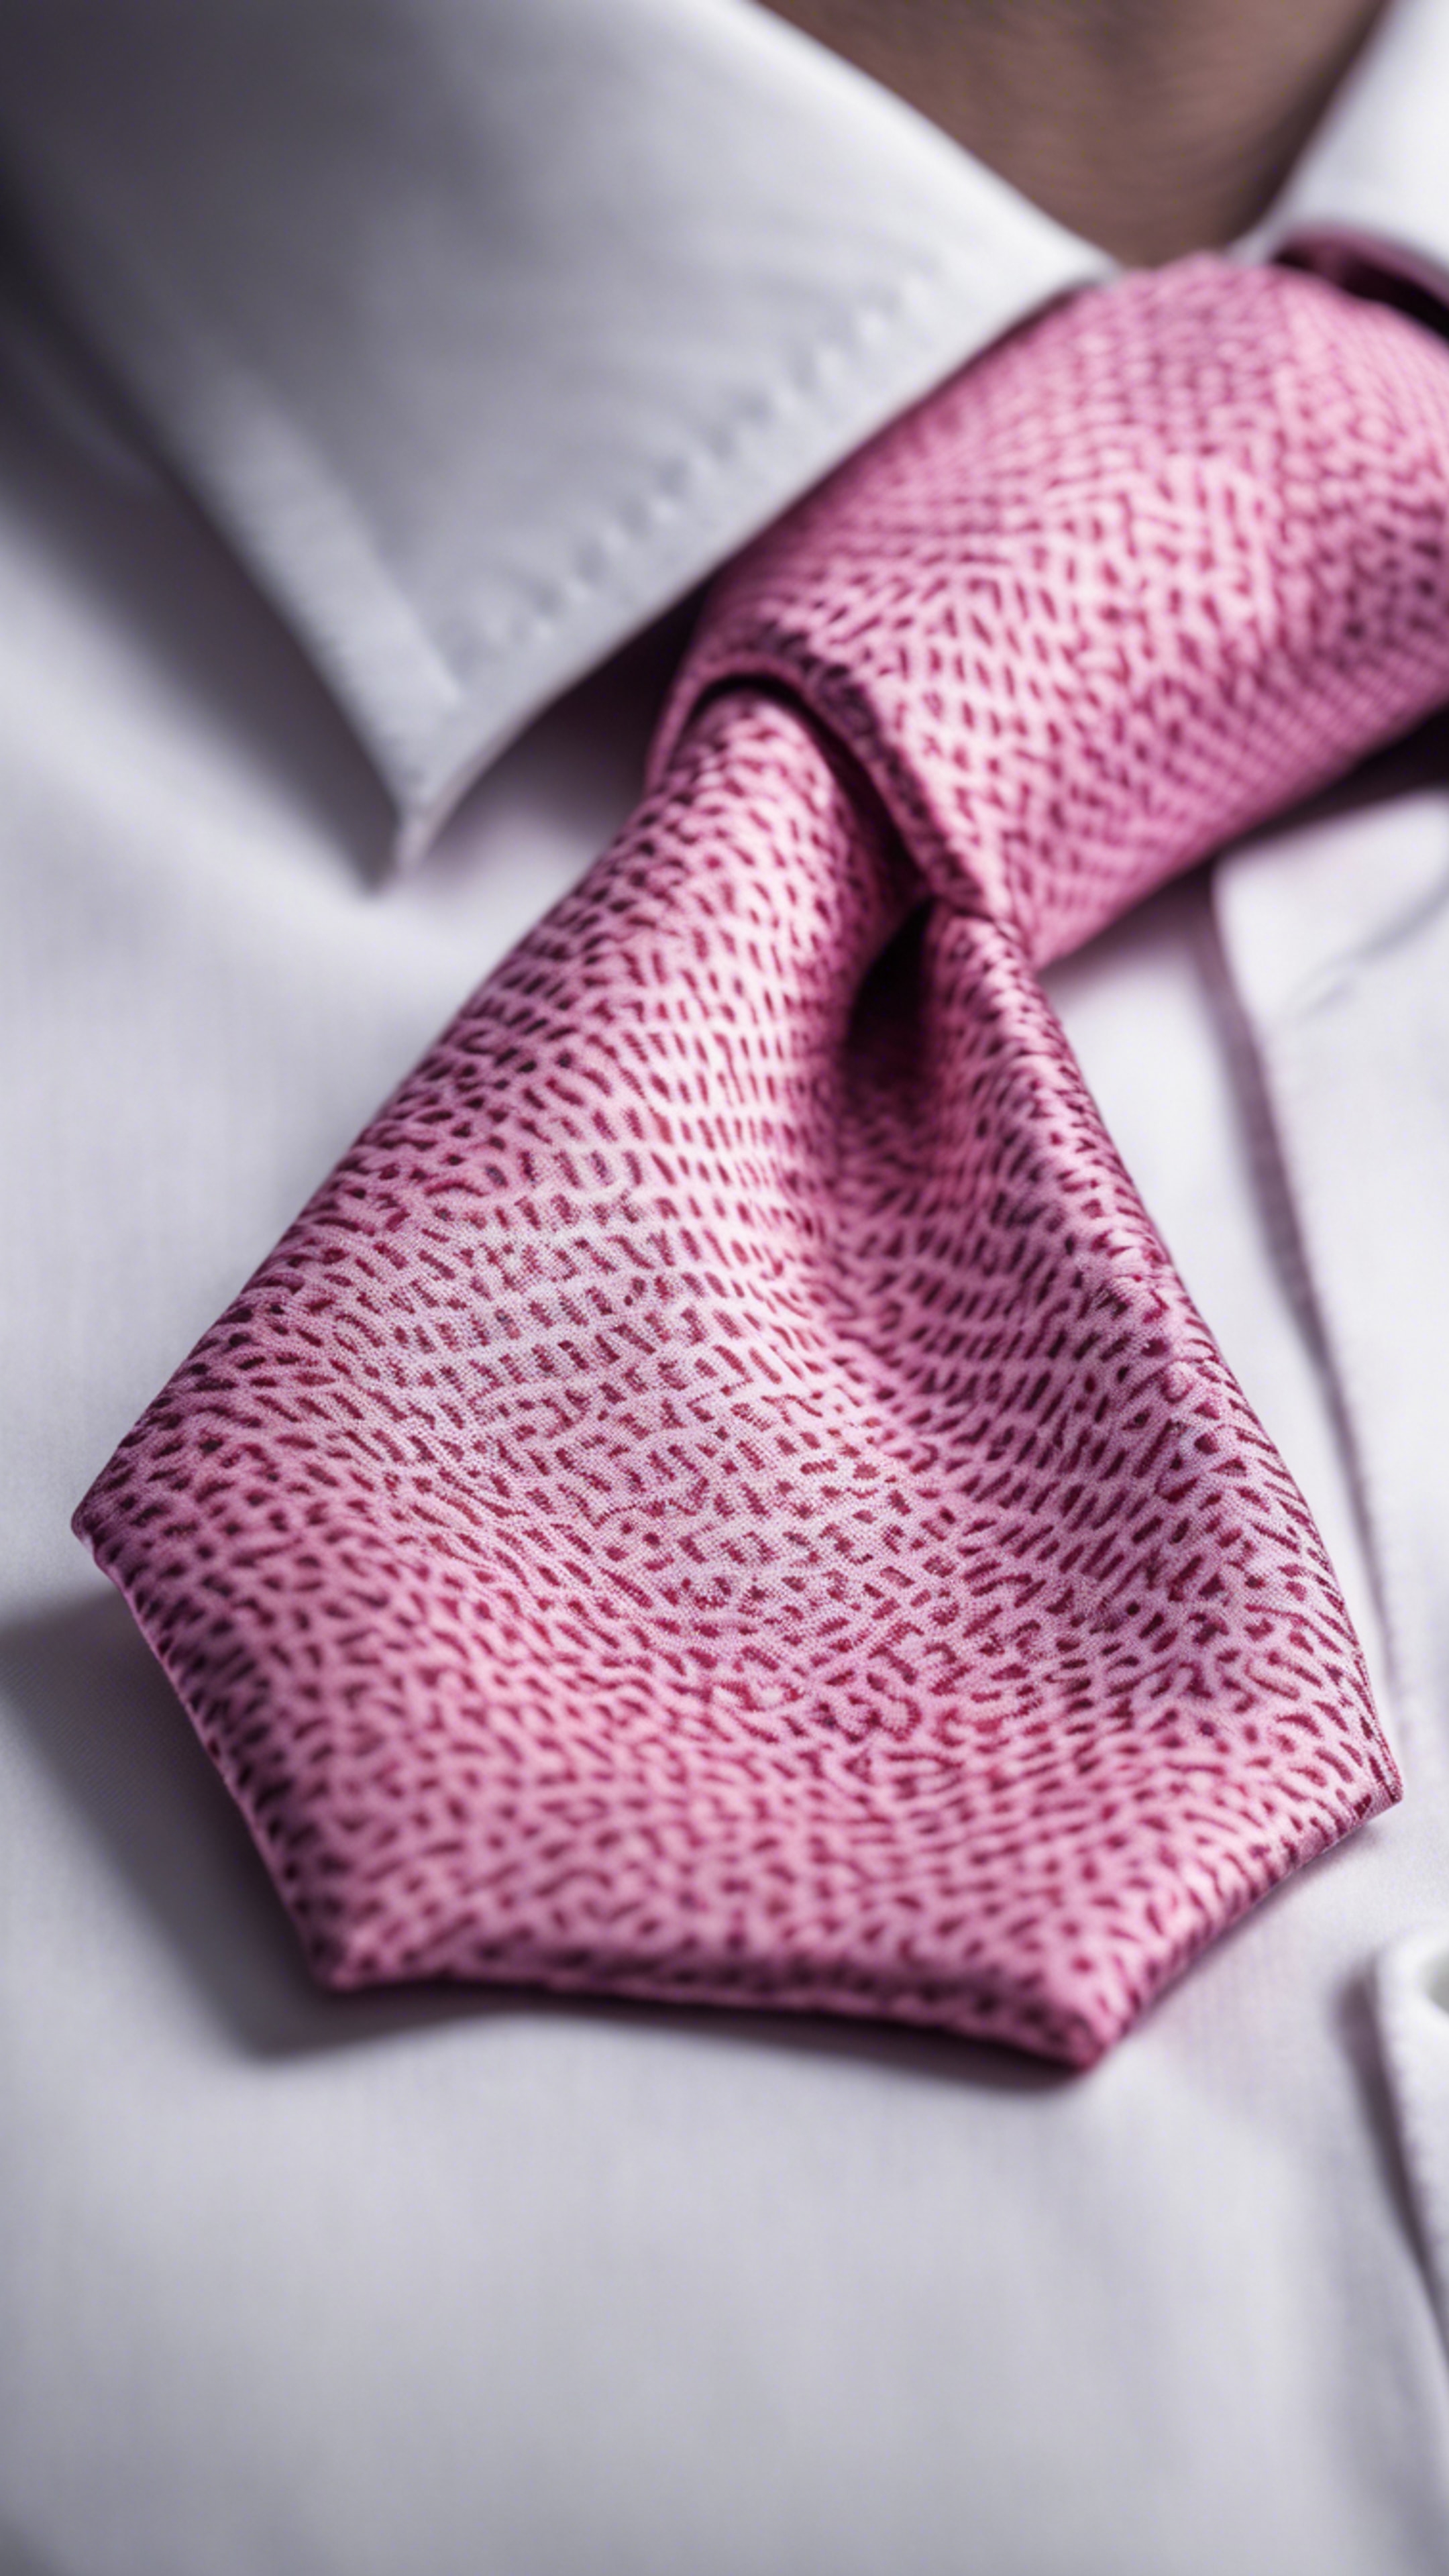 A pink patterned silk tie atop a clean, starched white shirt, representing preppy fashion.壁紙[46ce982d17ca4b87a426]